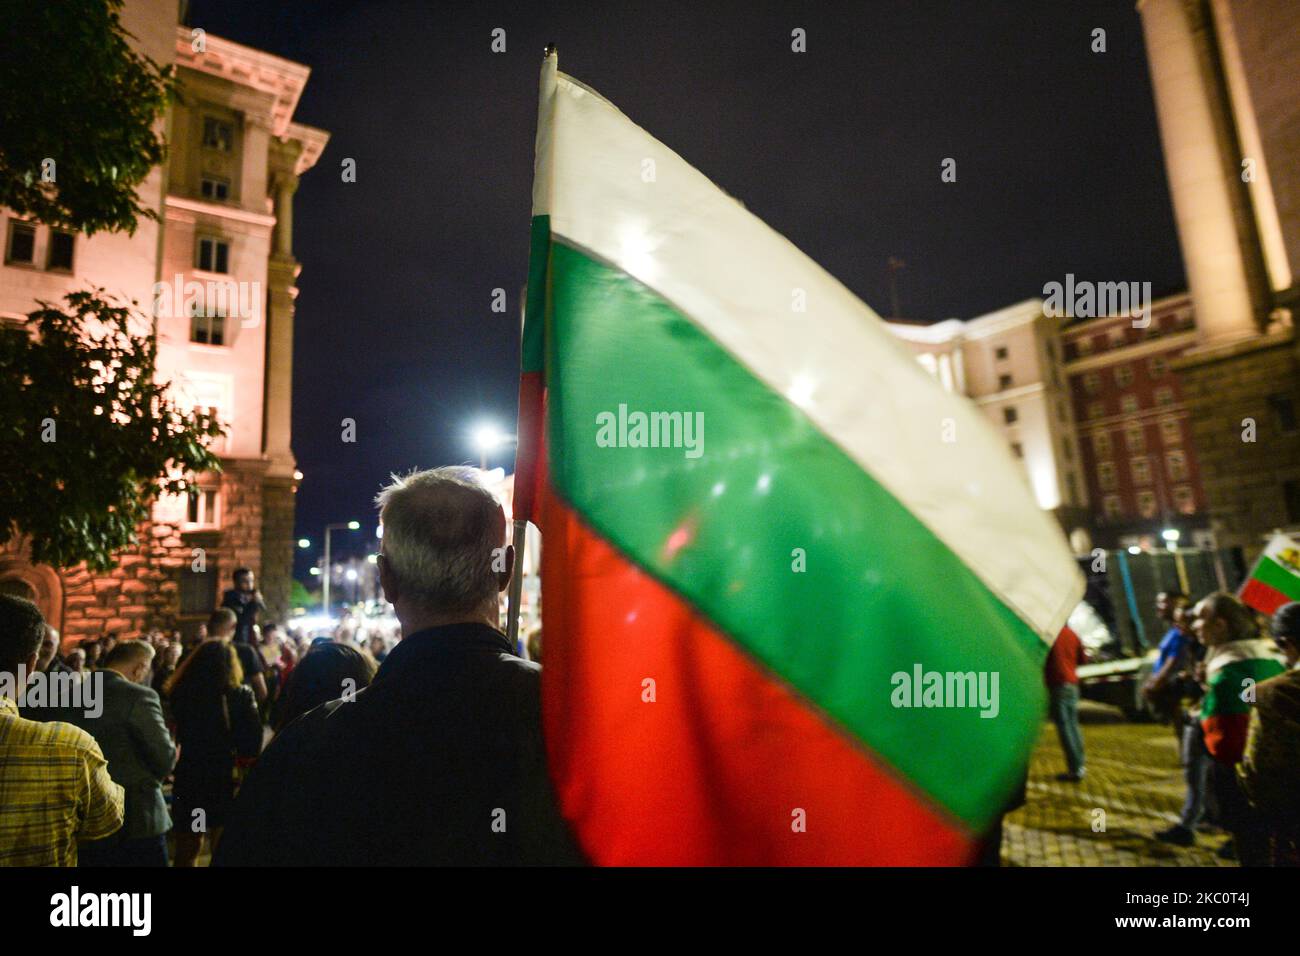 A protester holds a Bulgarian national flag on the 82nd day of anti-government protest in Sofia, in the Triangle of Power (the space between the buildings of the Presidency, the National Assembly and the Council of Ministers). For nearly three months people have been taking part in daily protests against corruption, demanding the resignation of the government of Boyko Borissov, in power since 2009. On Monday, September 28, 2020, in Sofia, Bulgaria. (Photo by Artur Widak/NurPhoto) Stock Photo